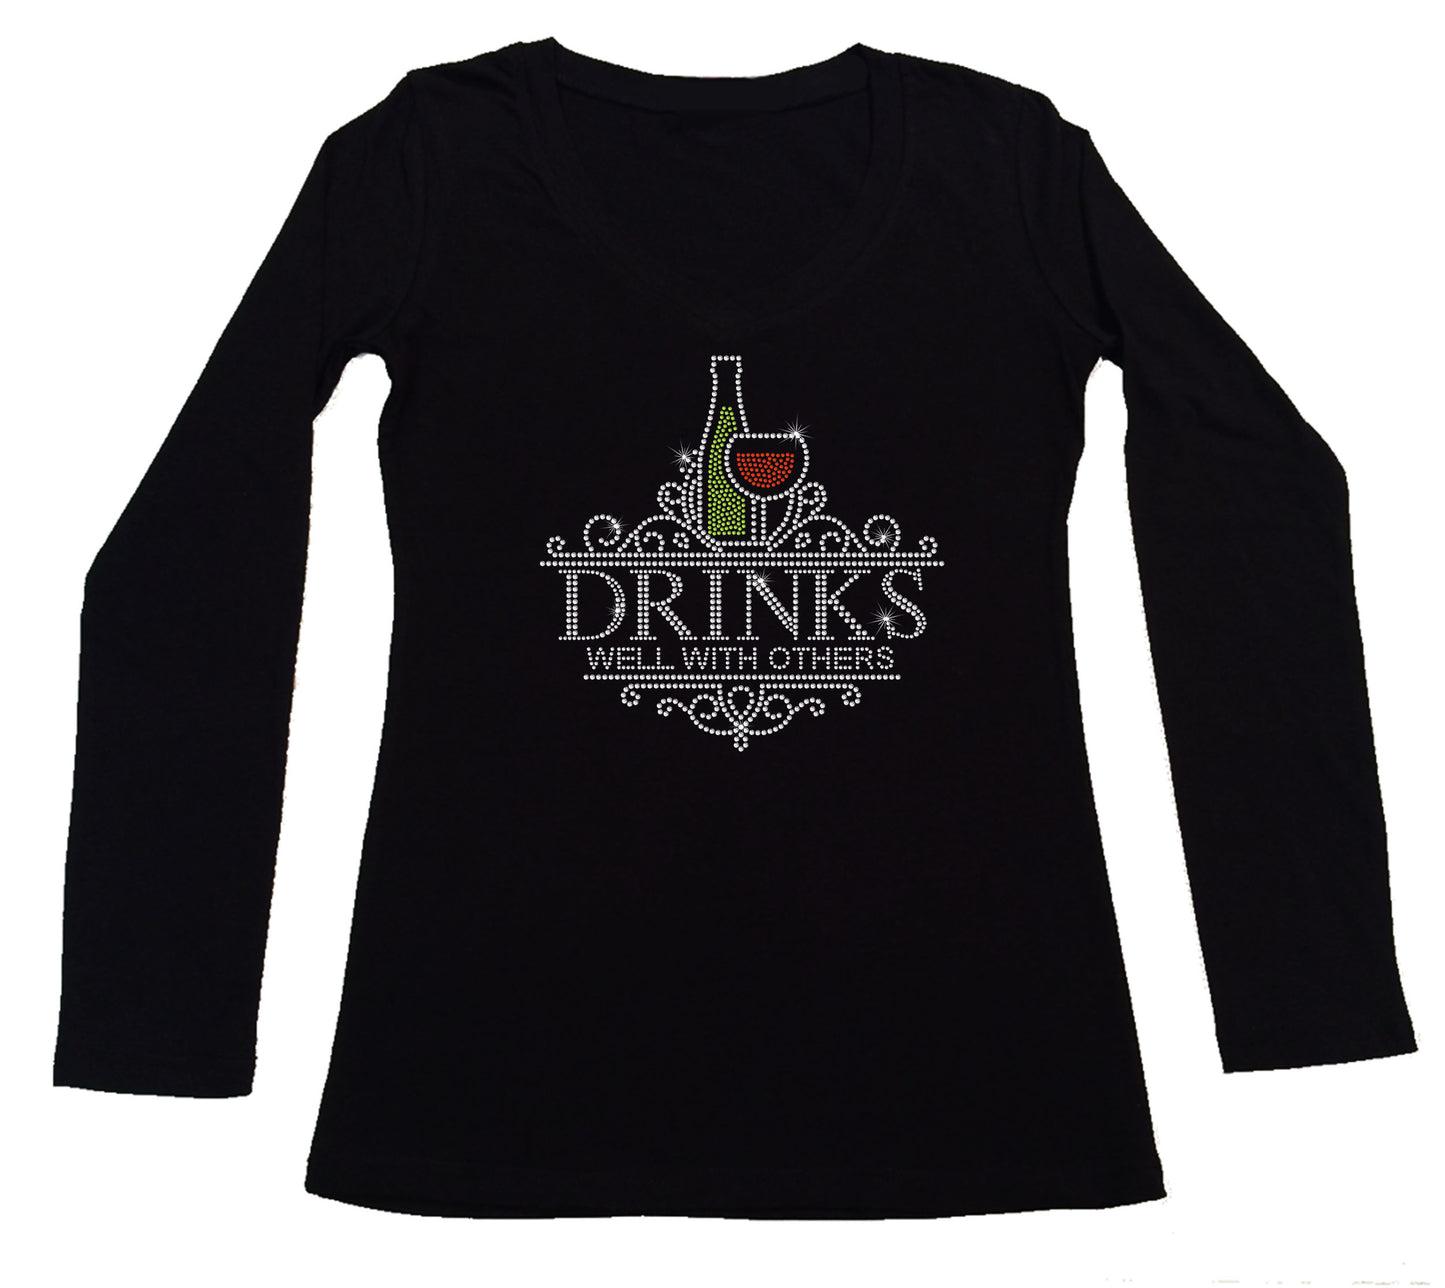 Women's Rhinestone Fitted Tight Snug Shirt Drinks Well with Others - Wine Glass and Wine Bottle